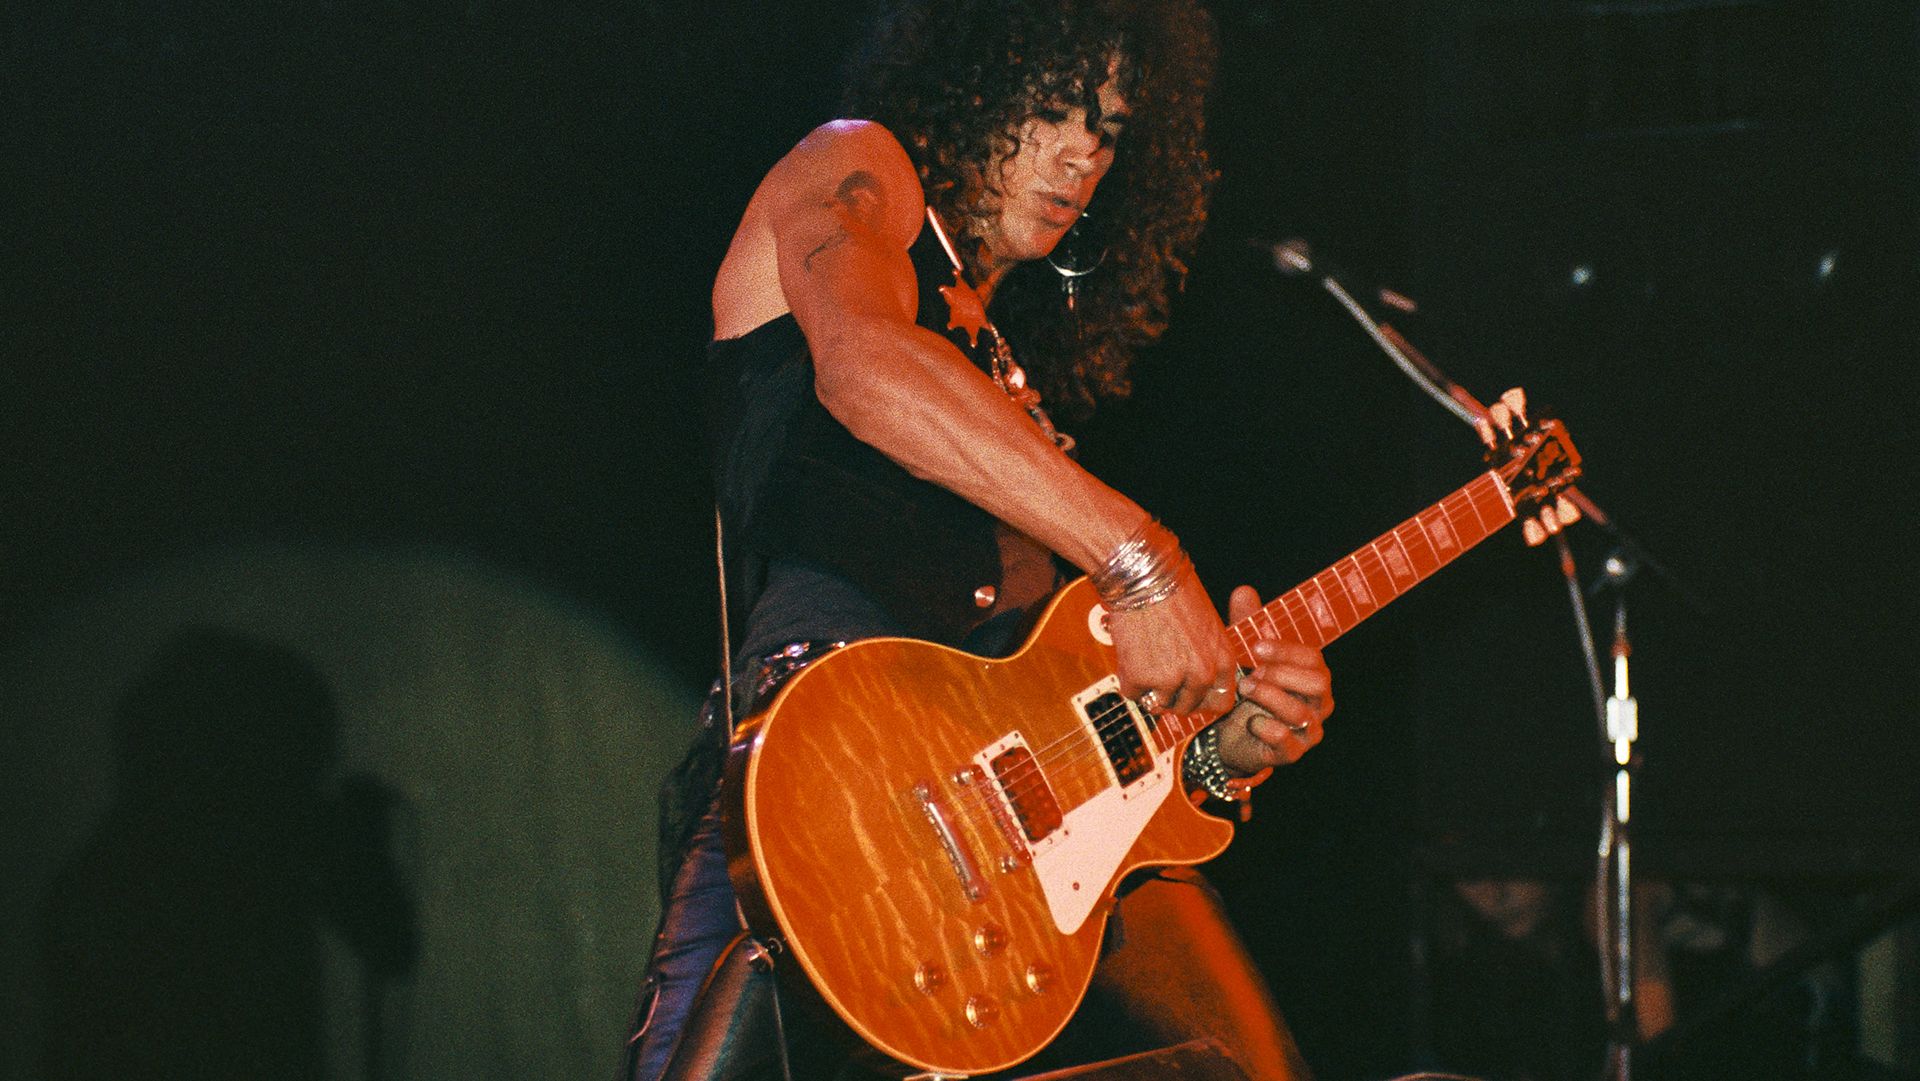 How a guitar signed by Slash from Guns N' Roses ended up for sale